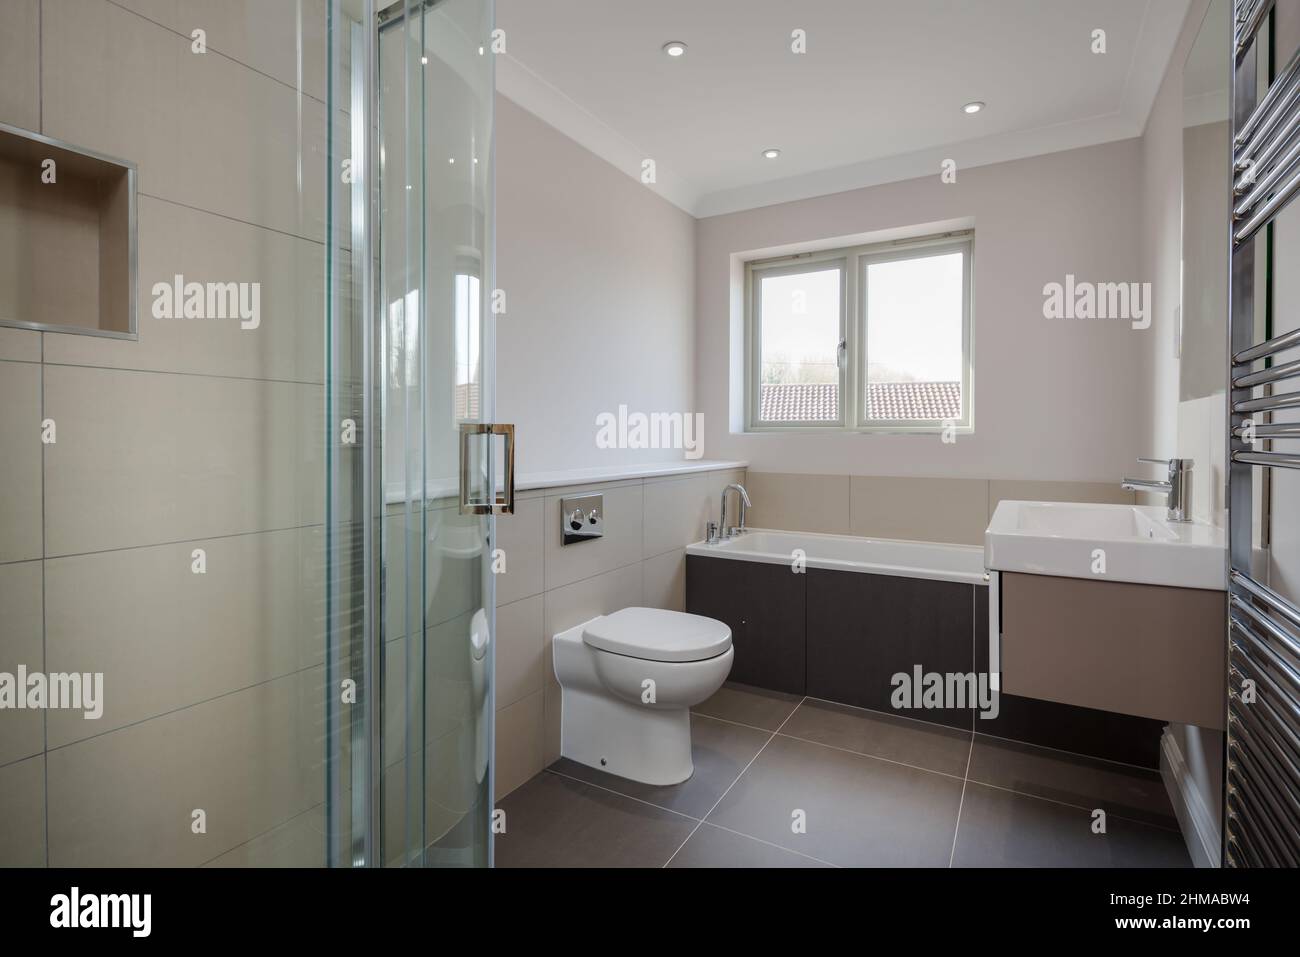 Great Wilbraham, Cambridgeshire, England - March 27 2017: Brand new bathroom and shower room within vacant just finished property with tiled cubicle a Stock Photo